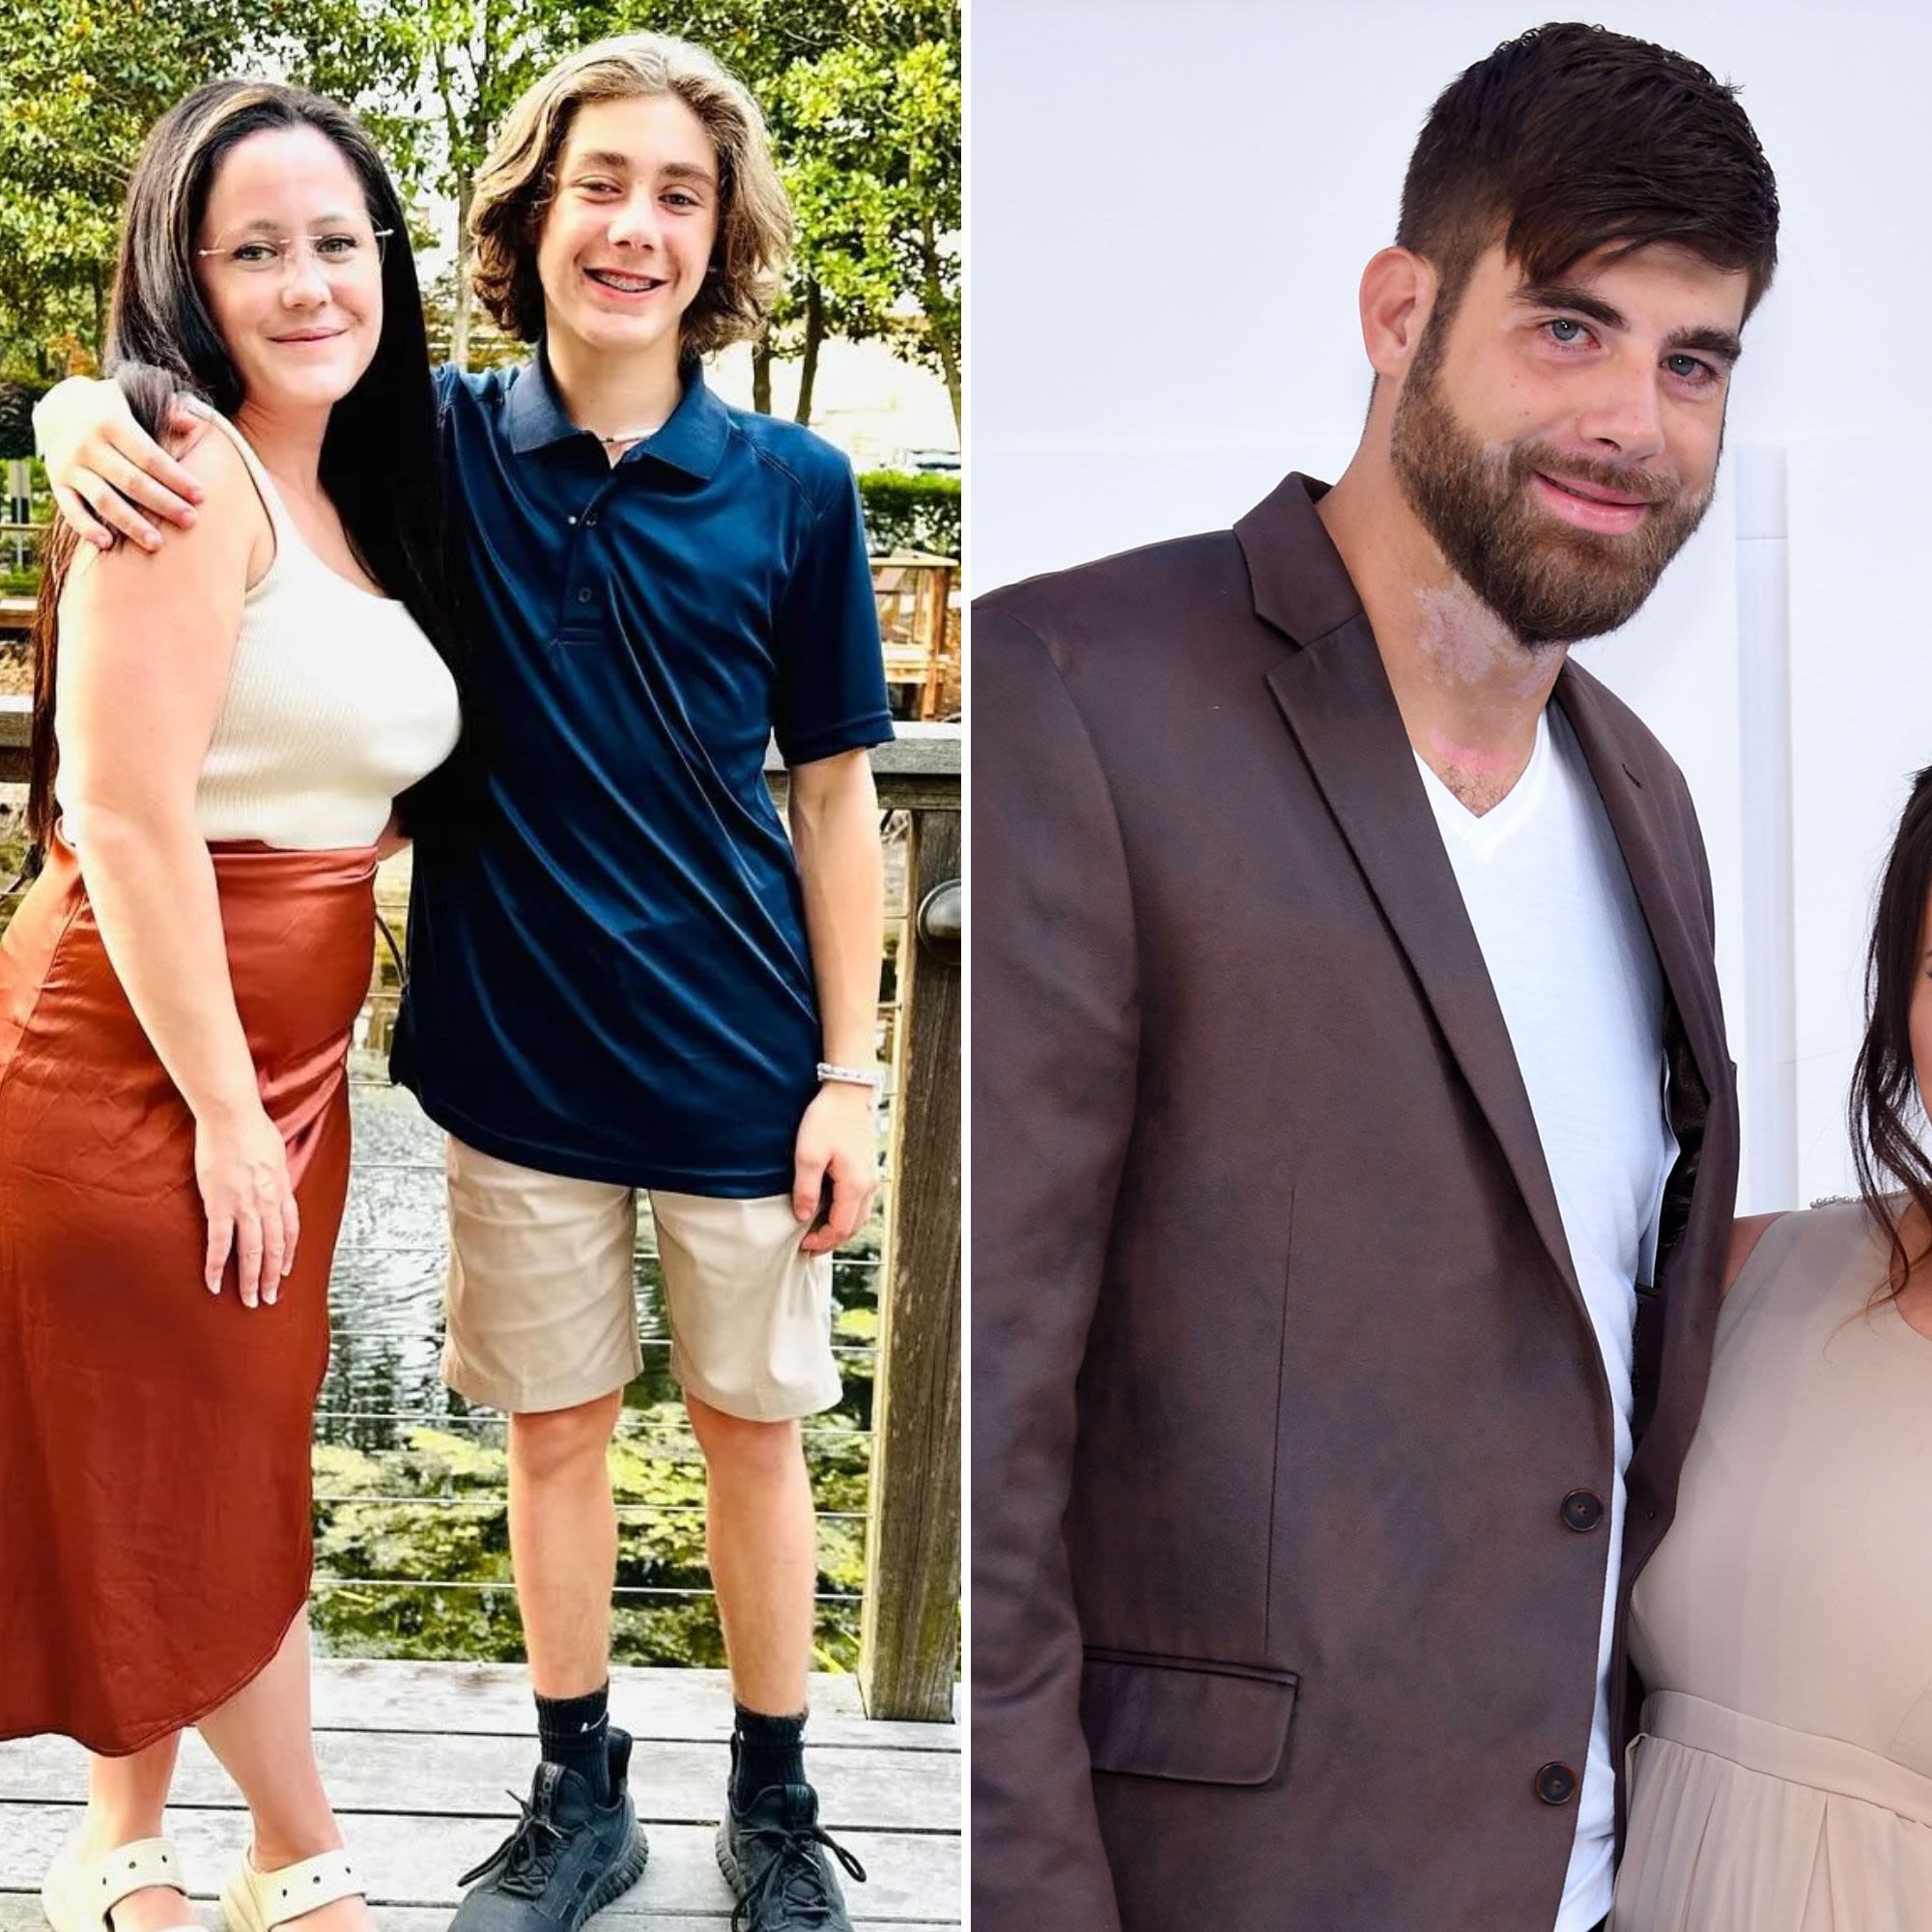 Teen Mom’s Jenelle Evans’ Son Jace Evans Set to Testify Against David Eason in Child Abuse Case